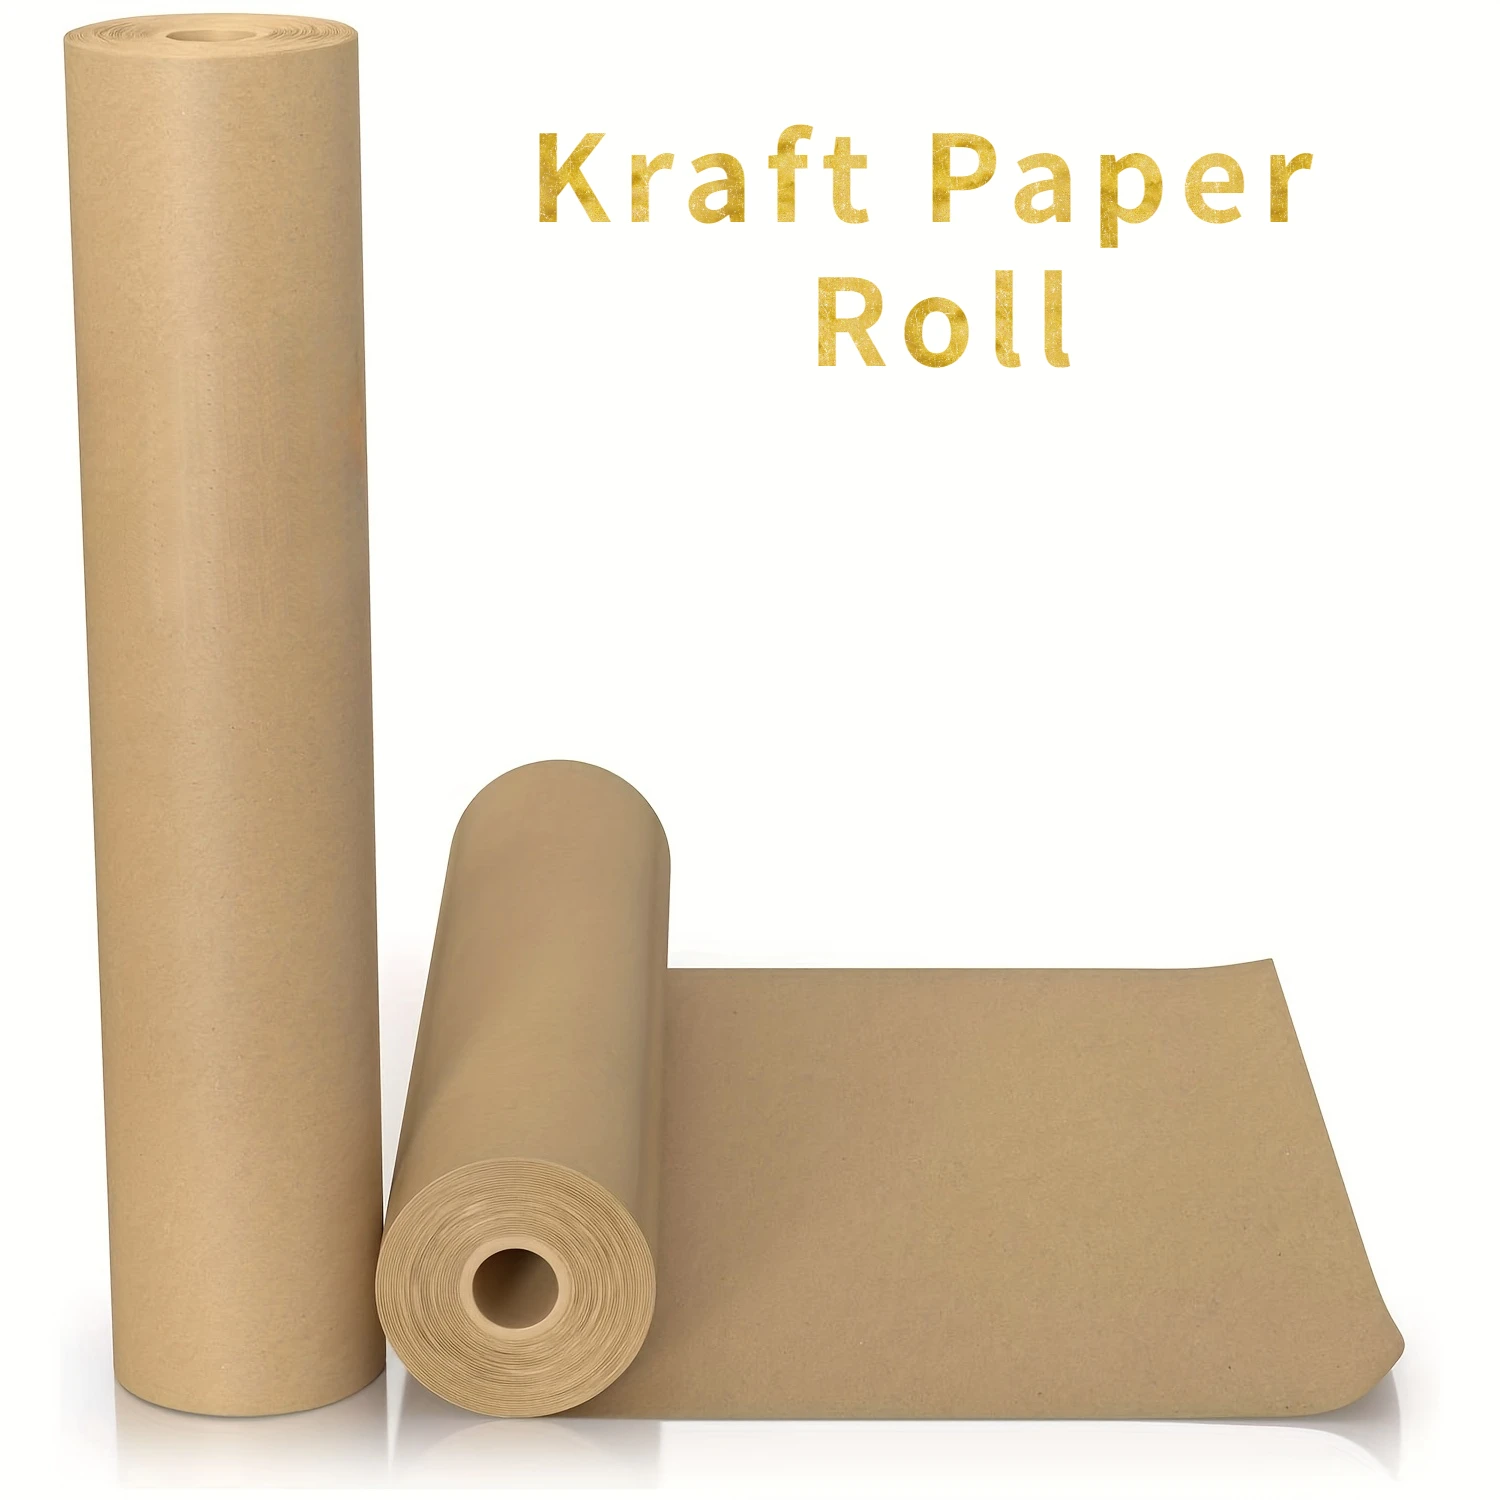 

Kraft Paper Roll Ideal For Packing Movin Gift Wrapping Postal Shipping Parcel Wall Art Crafts Bulletin Boards Floor Covering